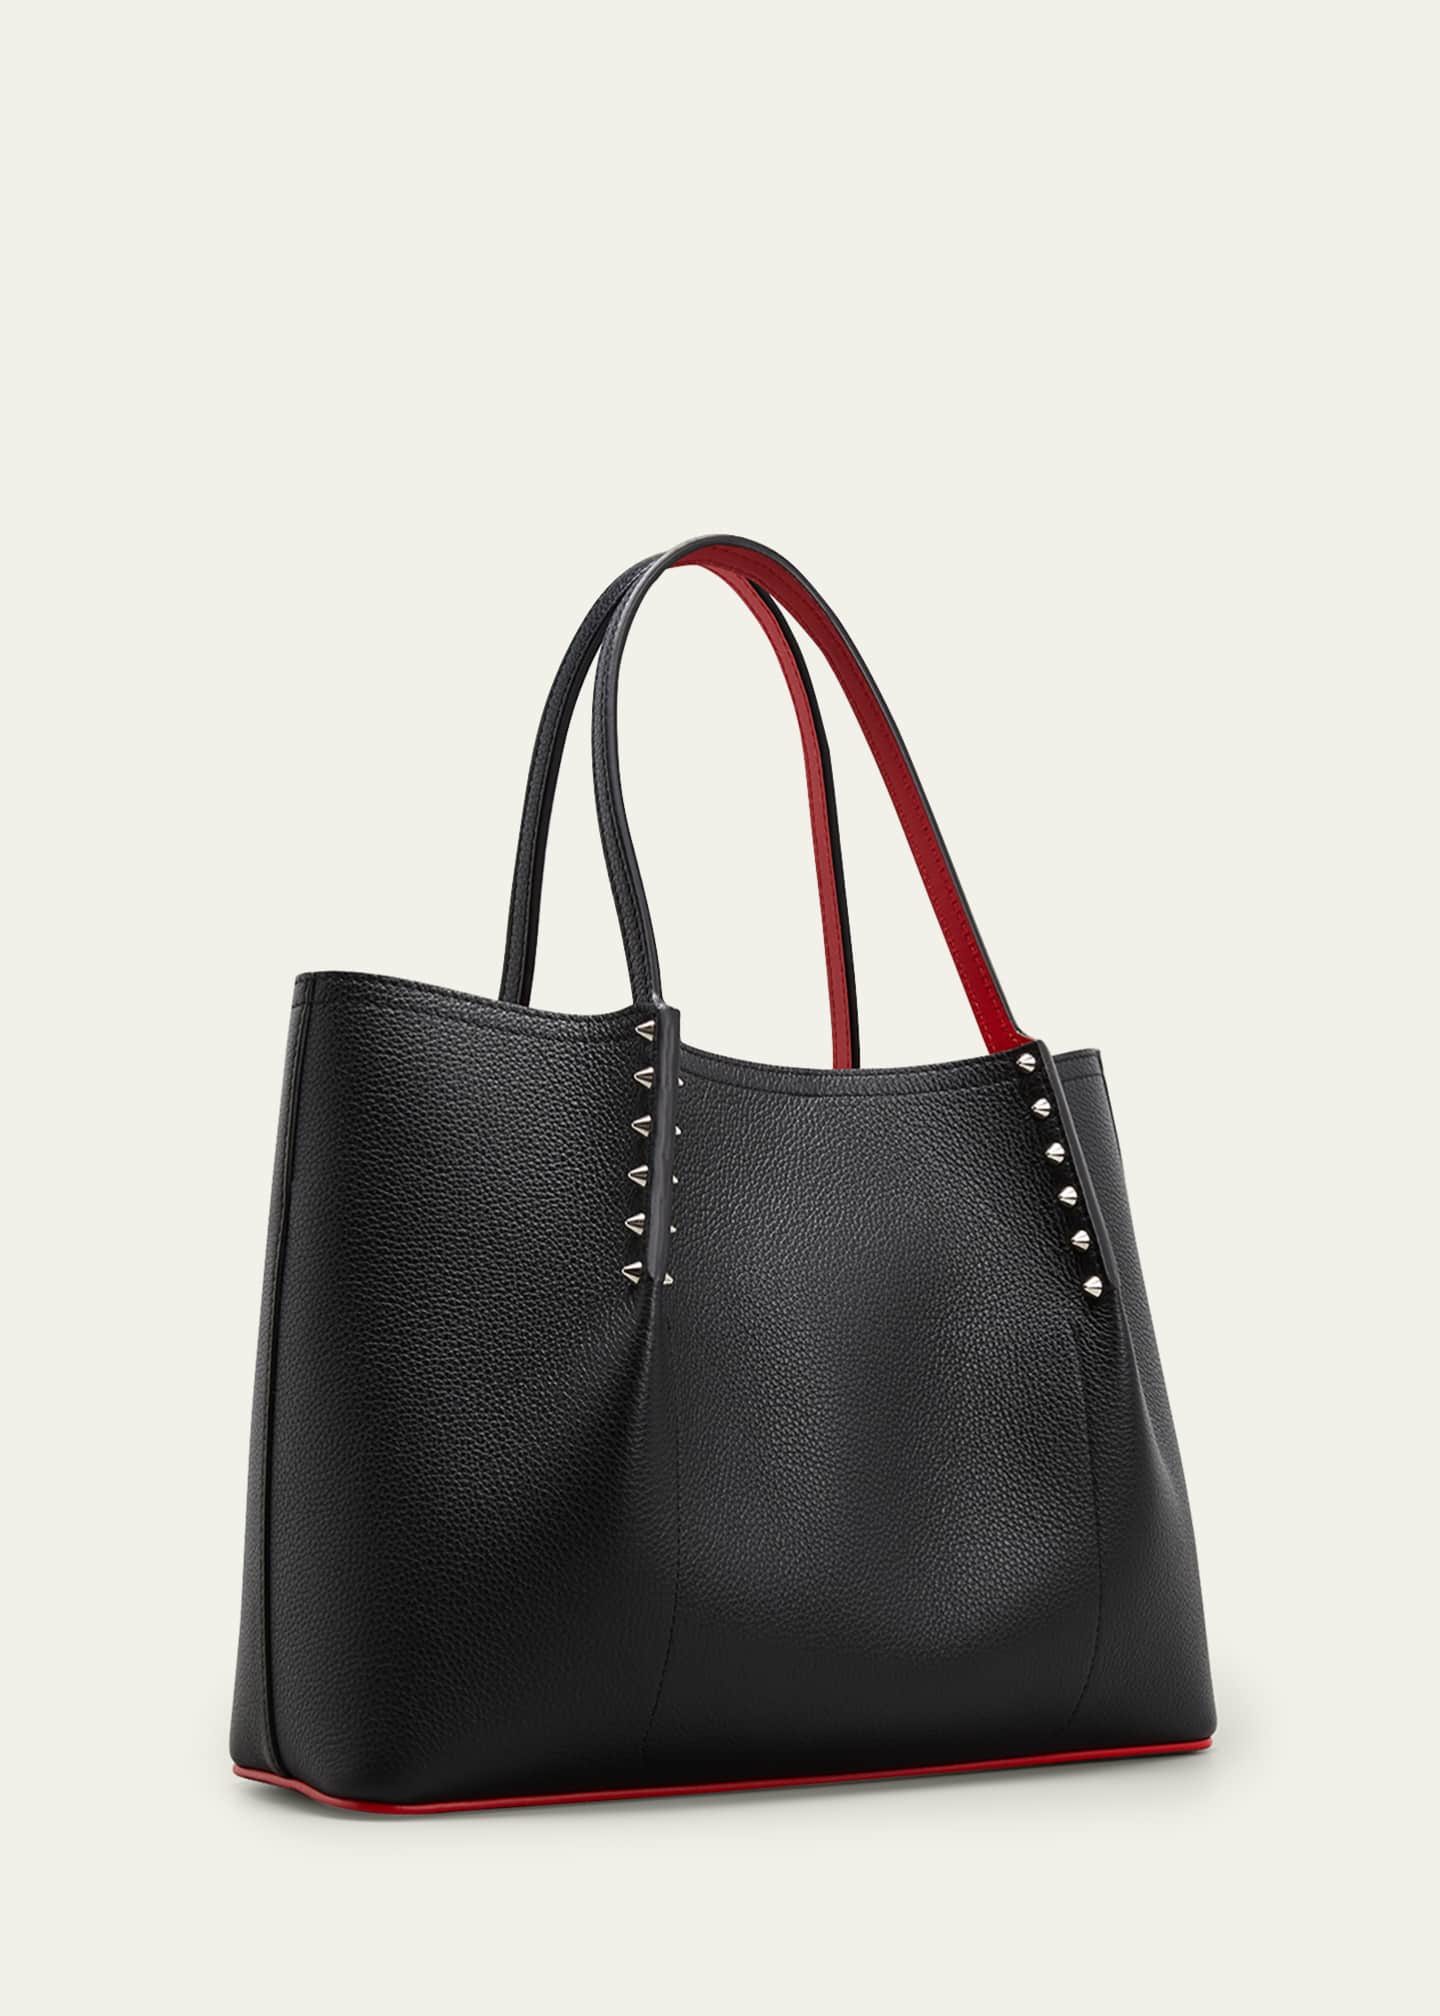 Christian Louboutin Cabarock Small Spike Red Sole Tote Bag - Bergdorf ...